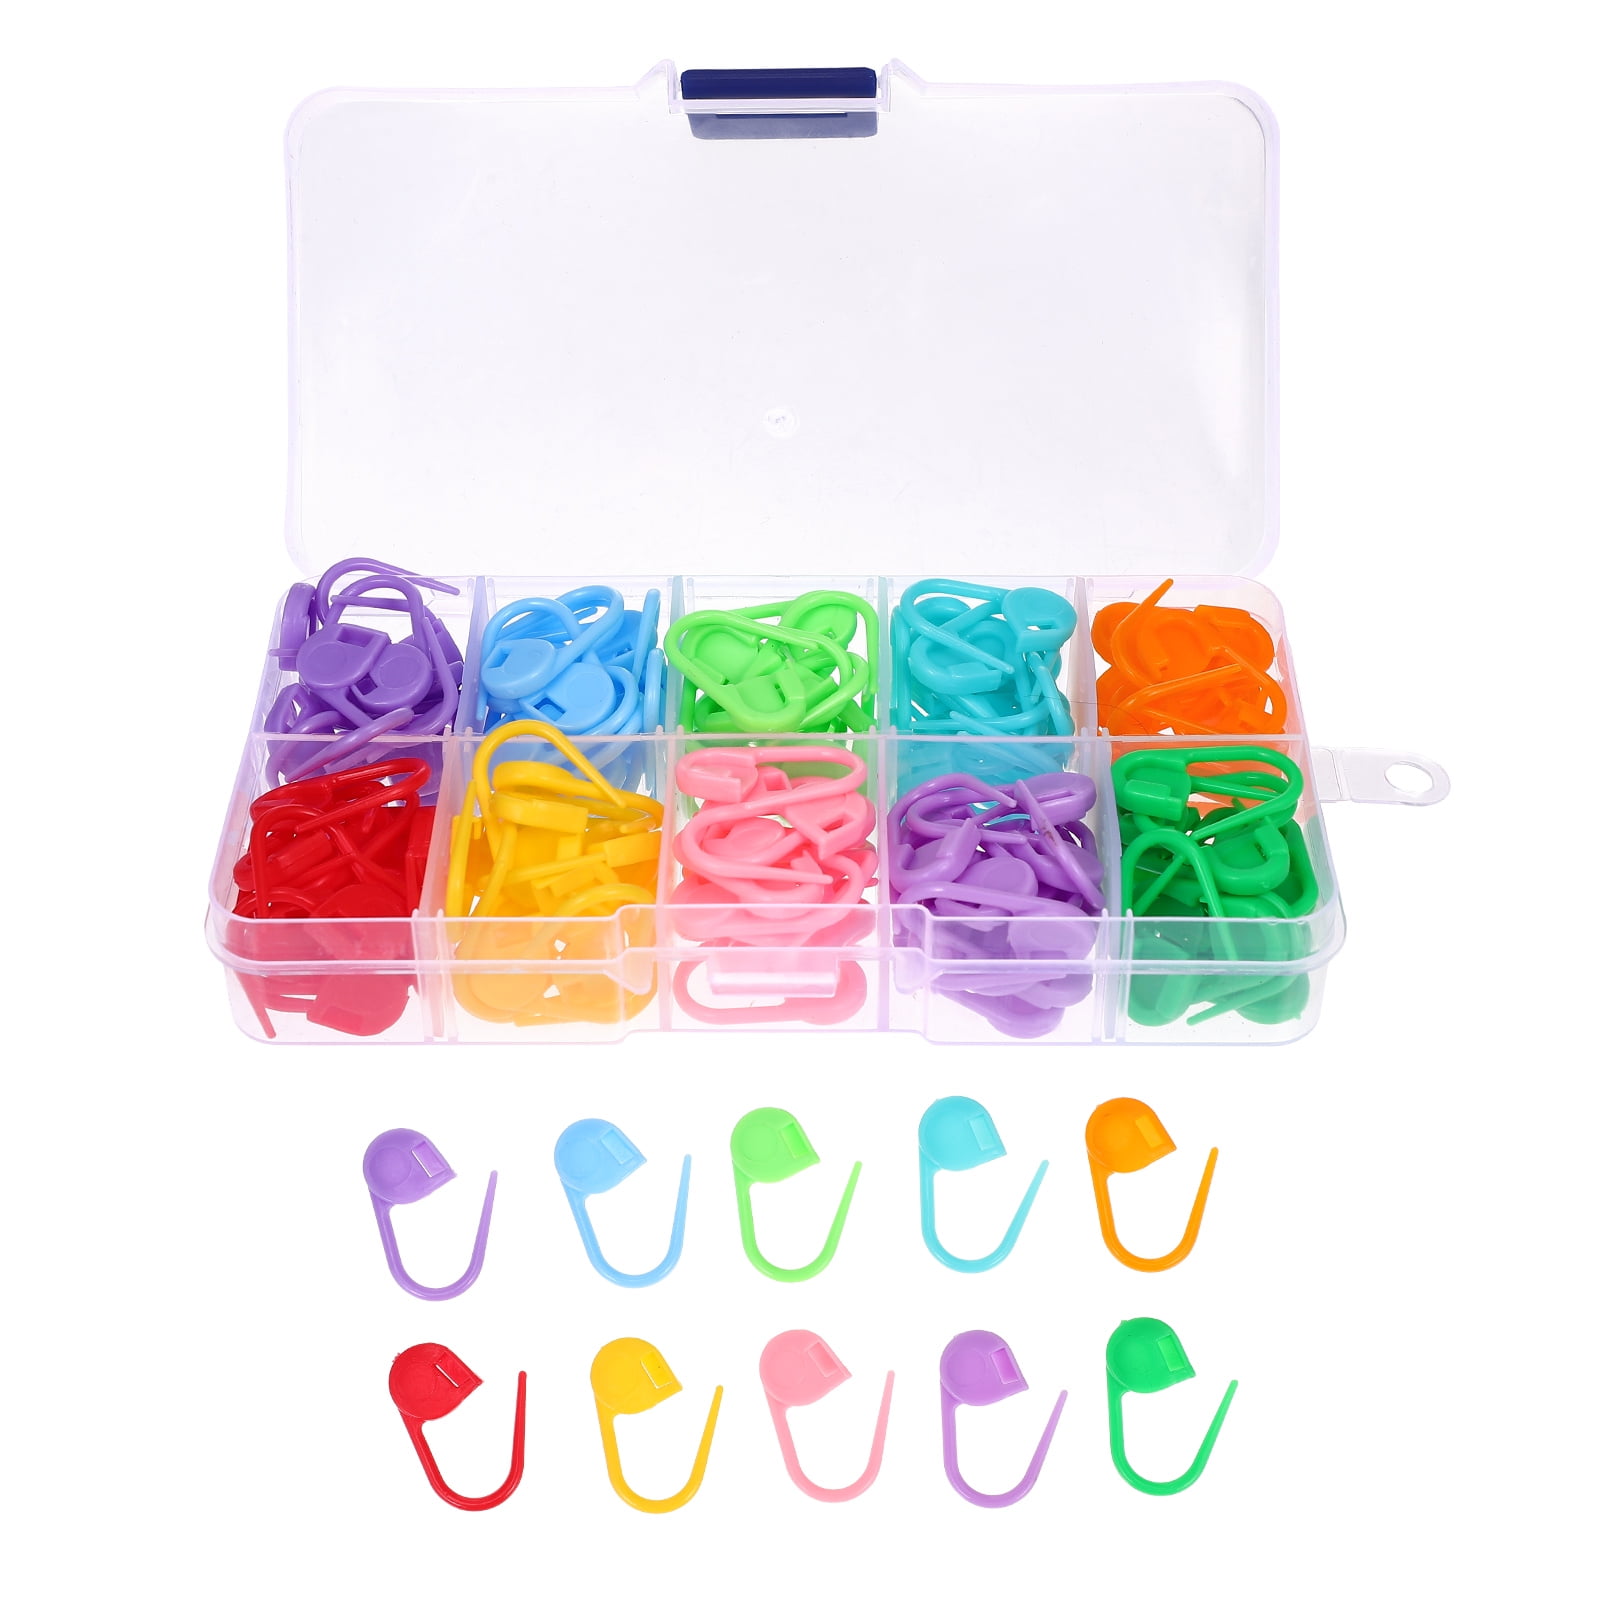 DPXWCCH Removable Stitch Markers Cup Cat Pattern Lovely 5 Pieces Crochet Markers for Knitting Crocheting